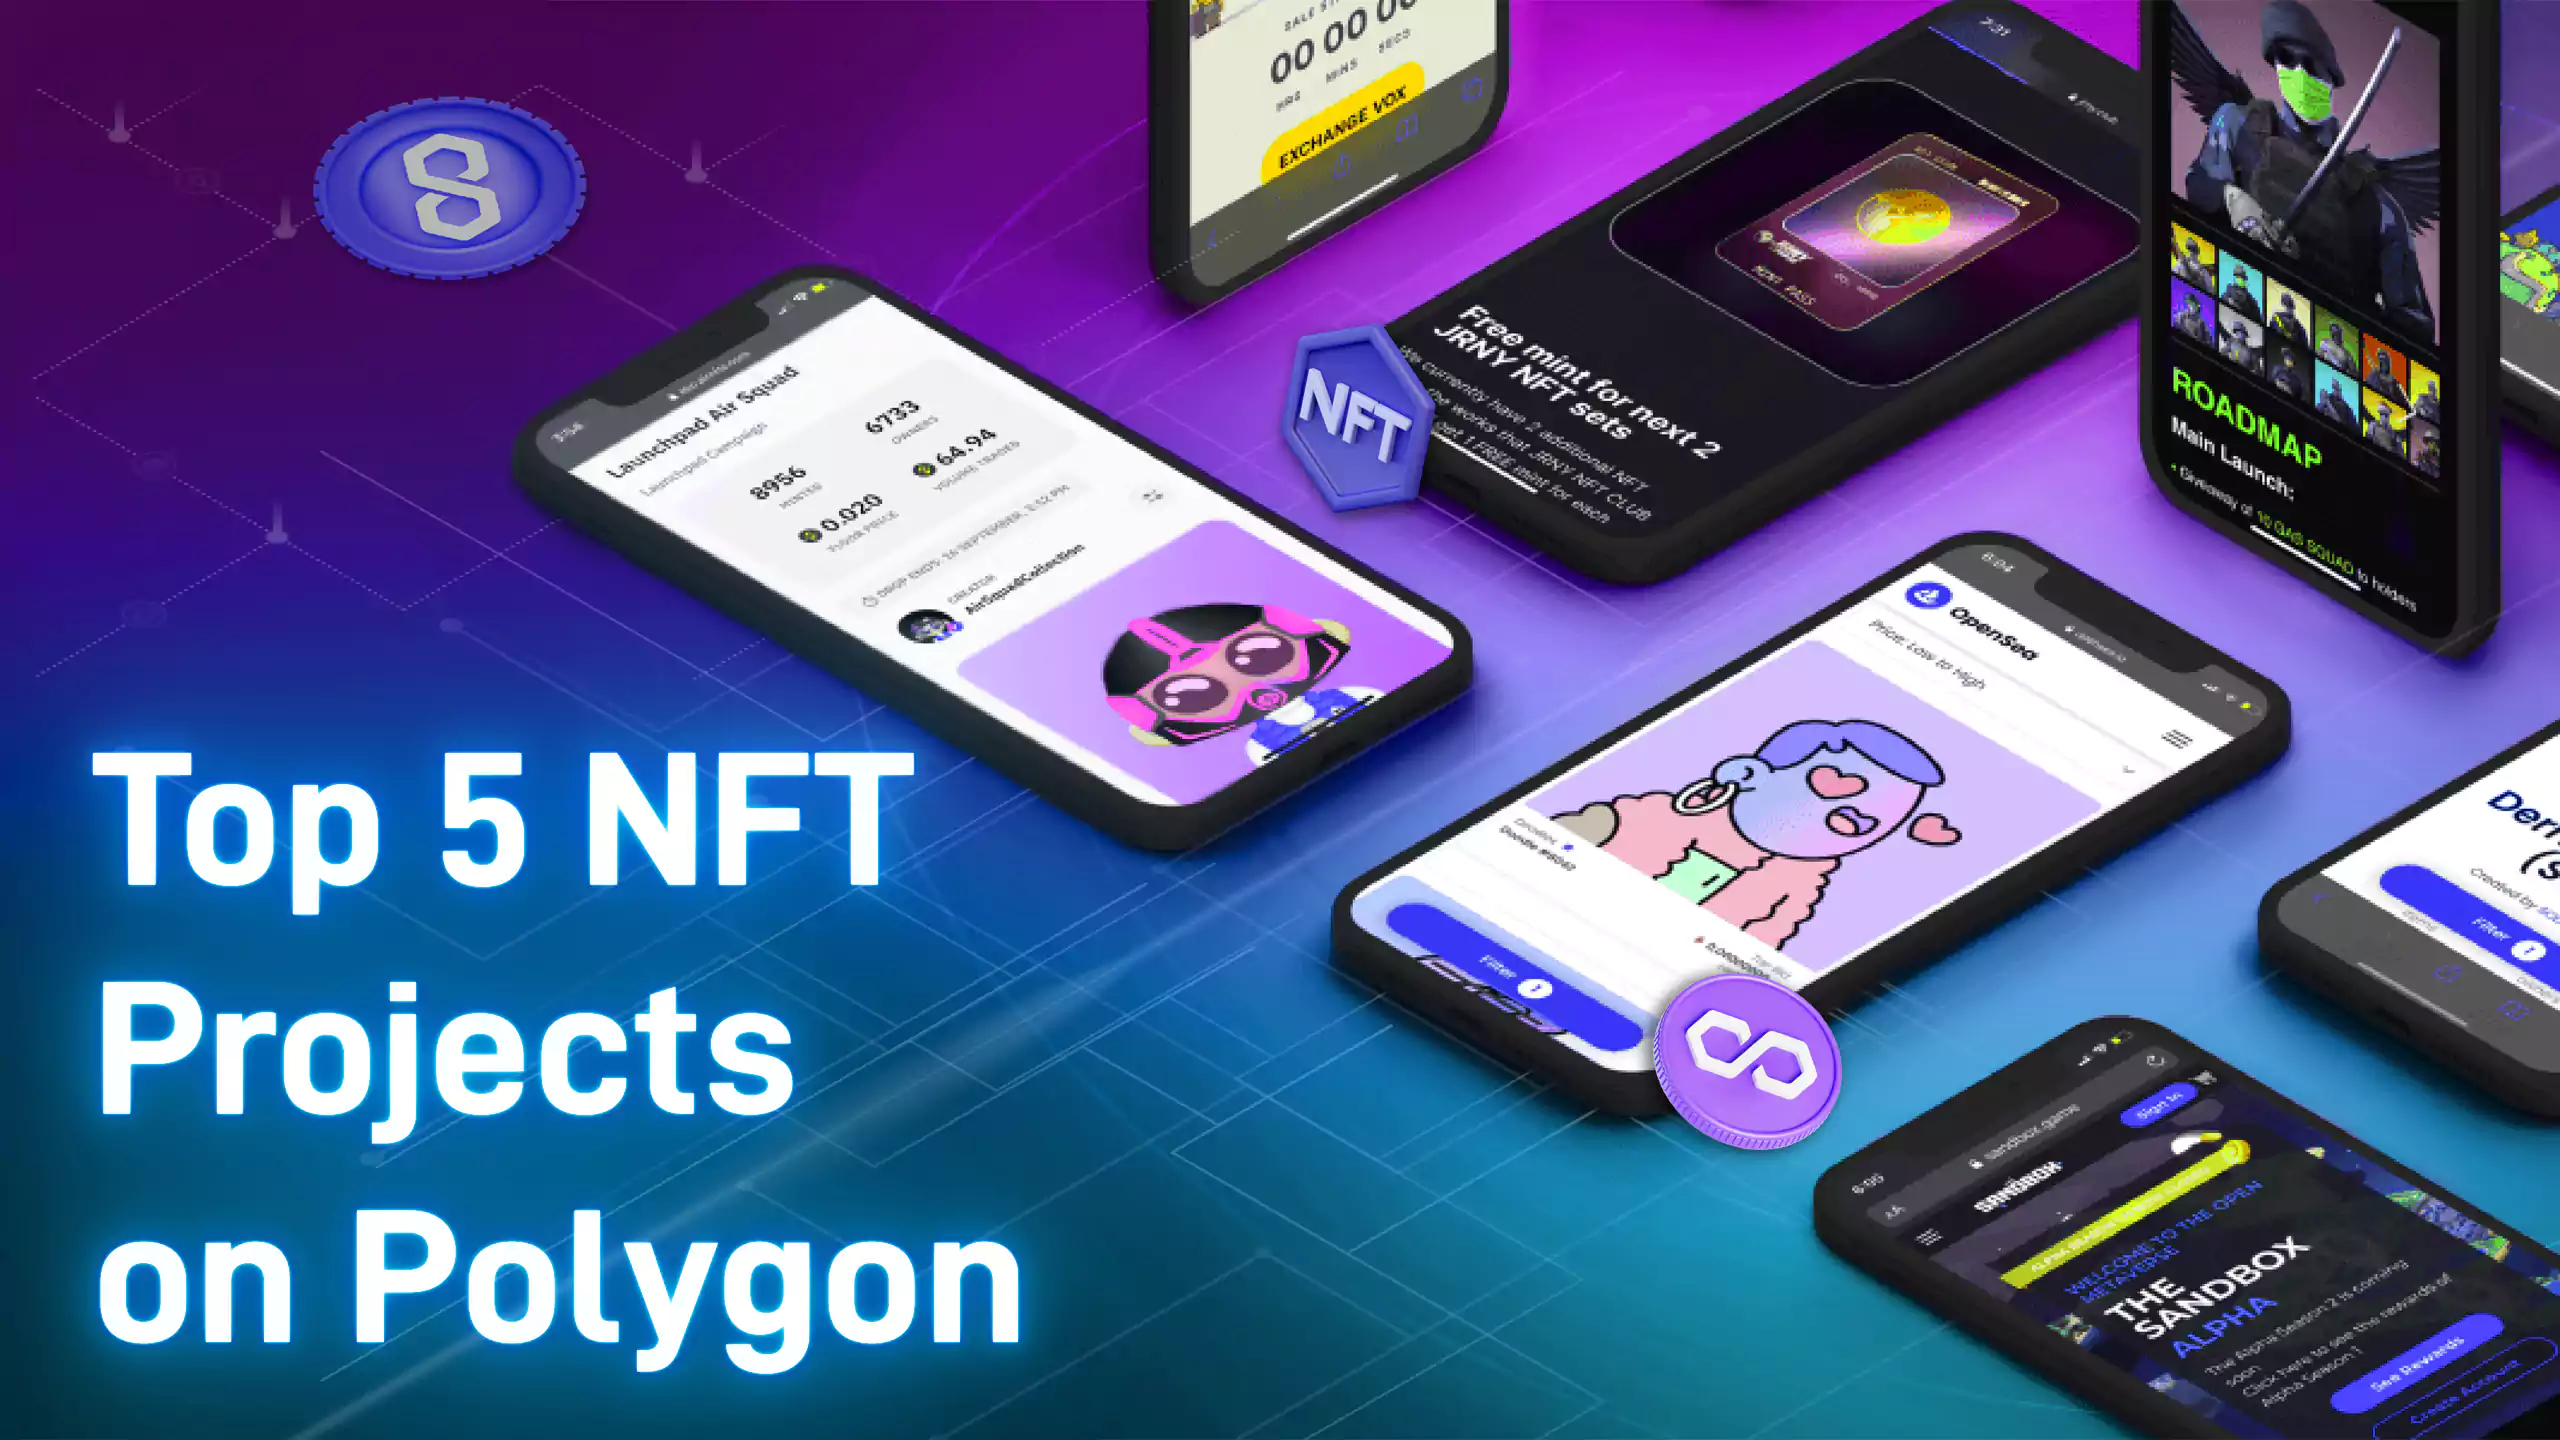 Top 5 NFT Projects on Polygon